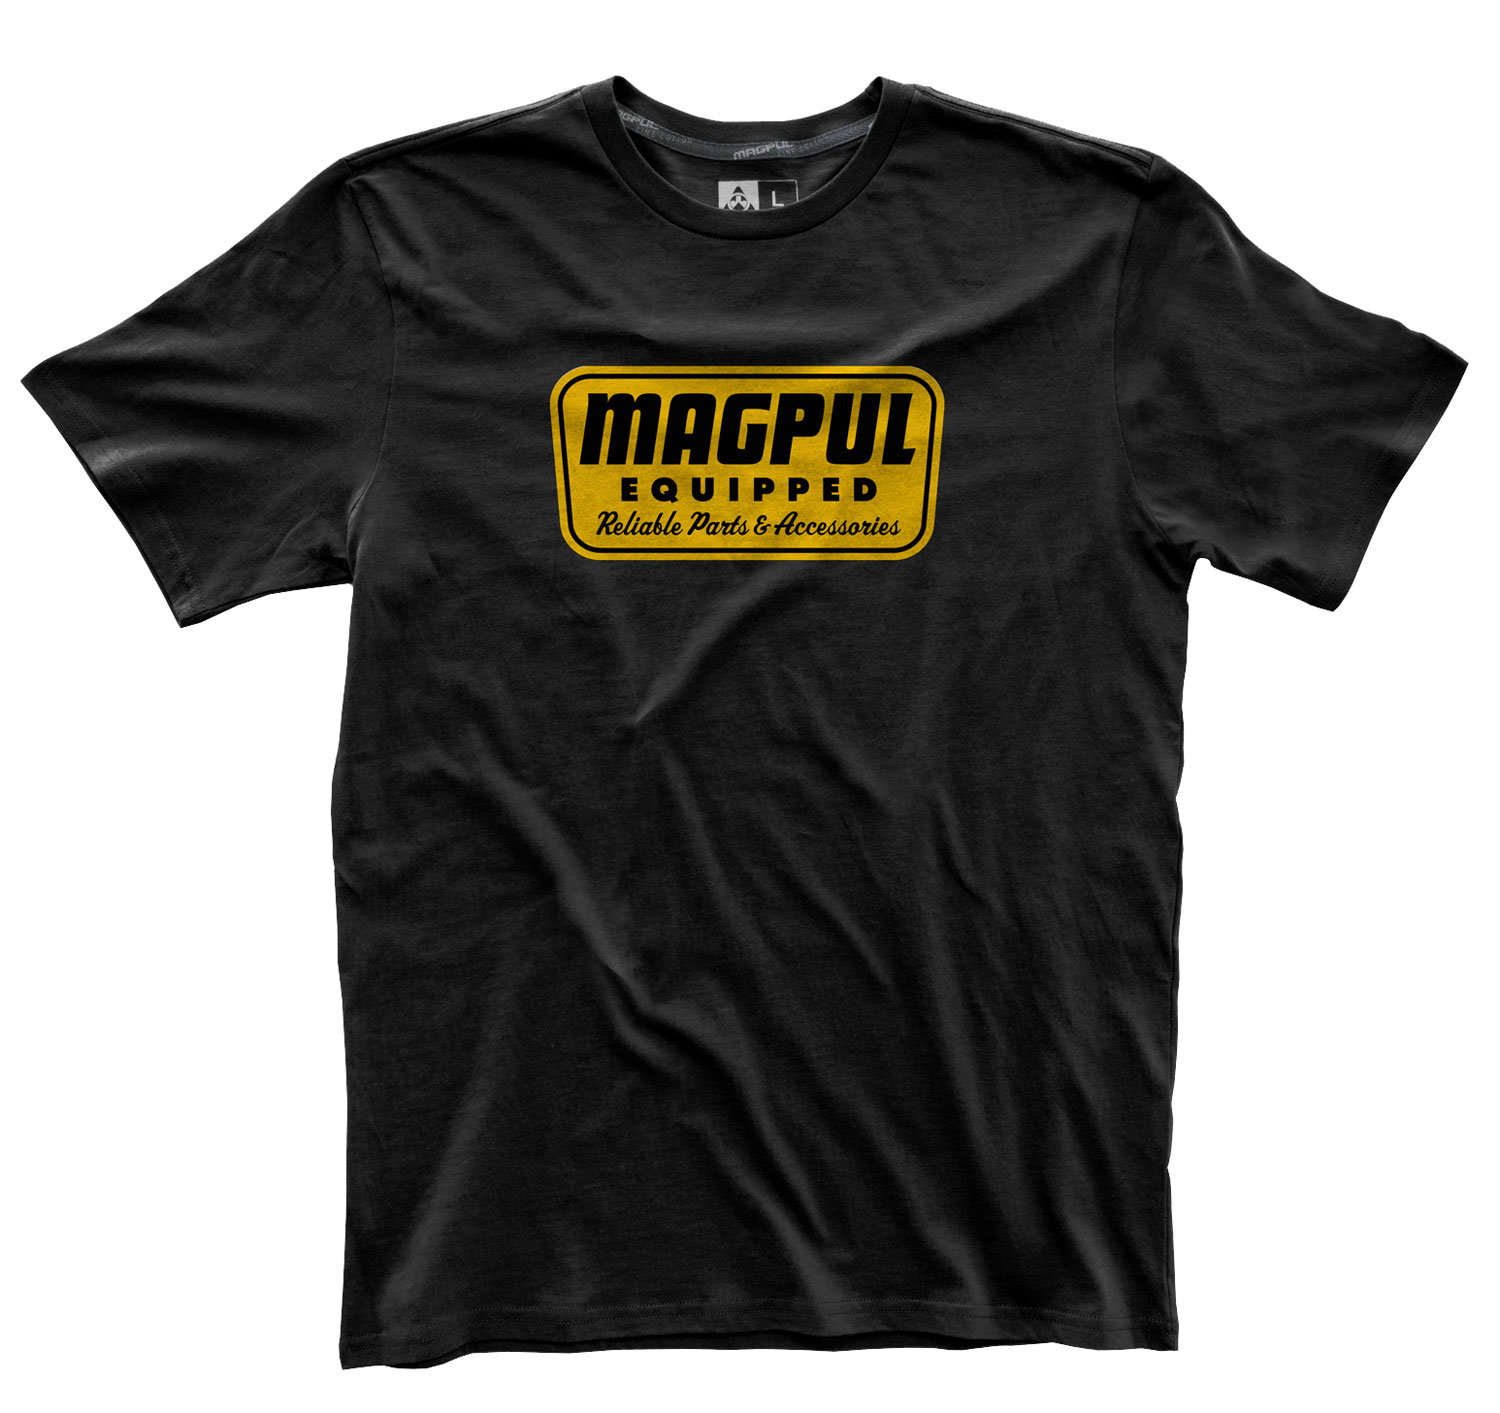 Magpul MAG1056-001-S Fine Cotton Reliable Parts T-Shirt Small Black